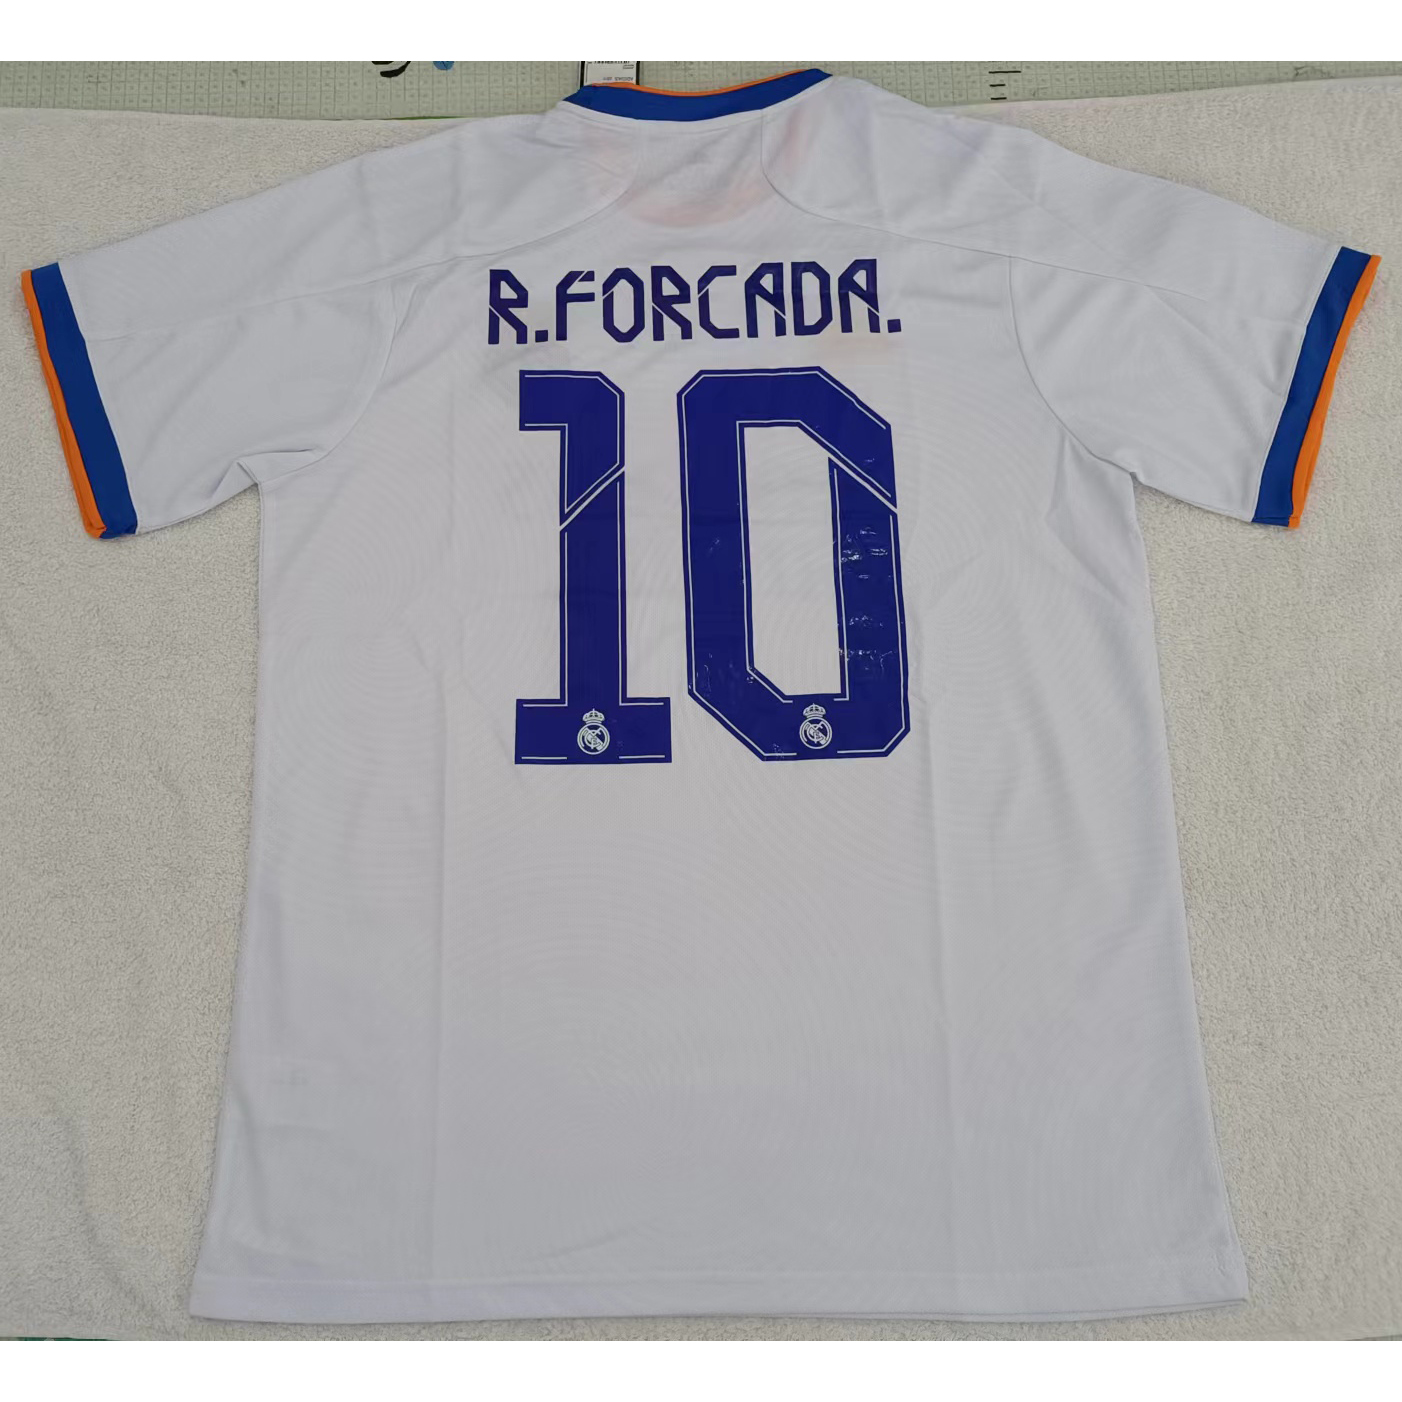 220844 Max Maillot Real Madrid R.FORCADA. 10 Blanc TailleXL